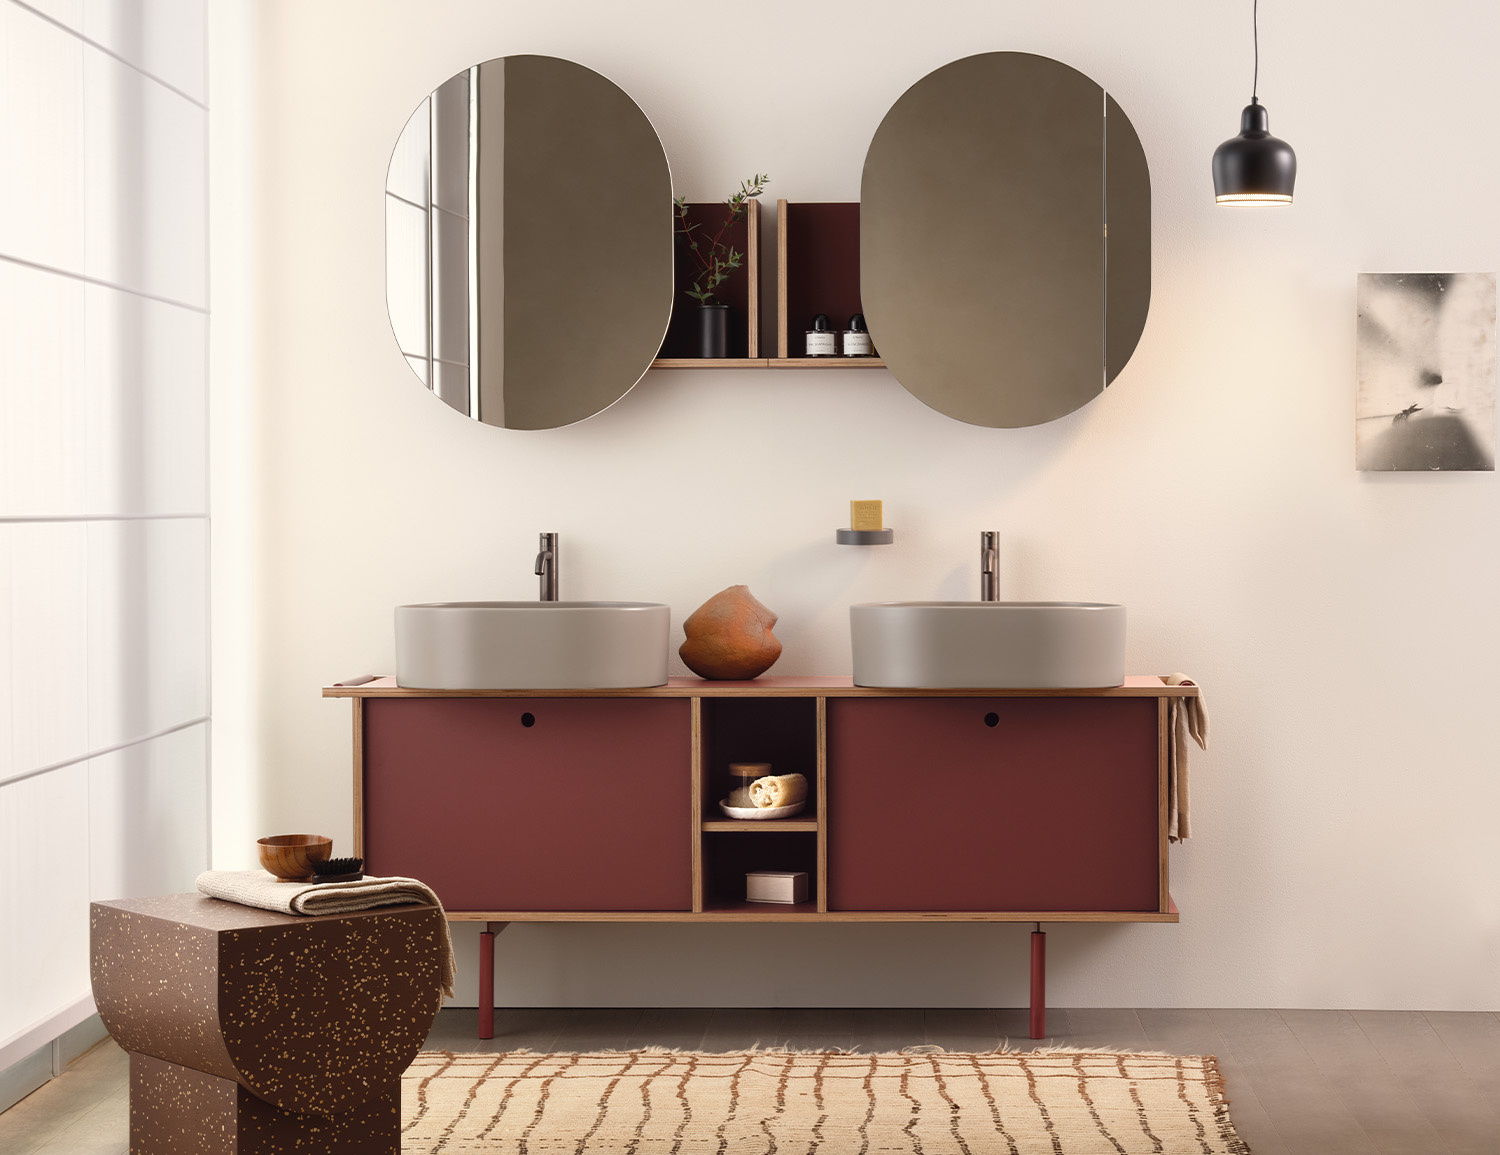 THEO 175 wins the Archiproducts Design Awards 2023